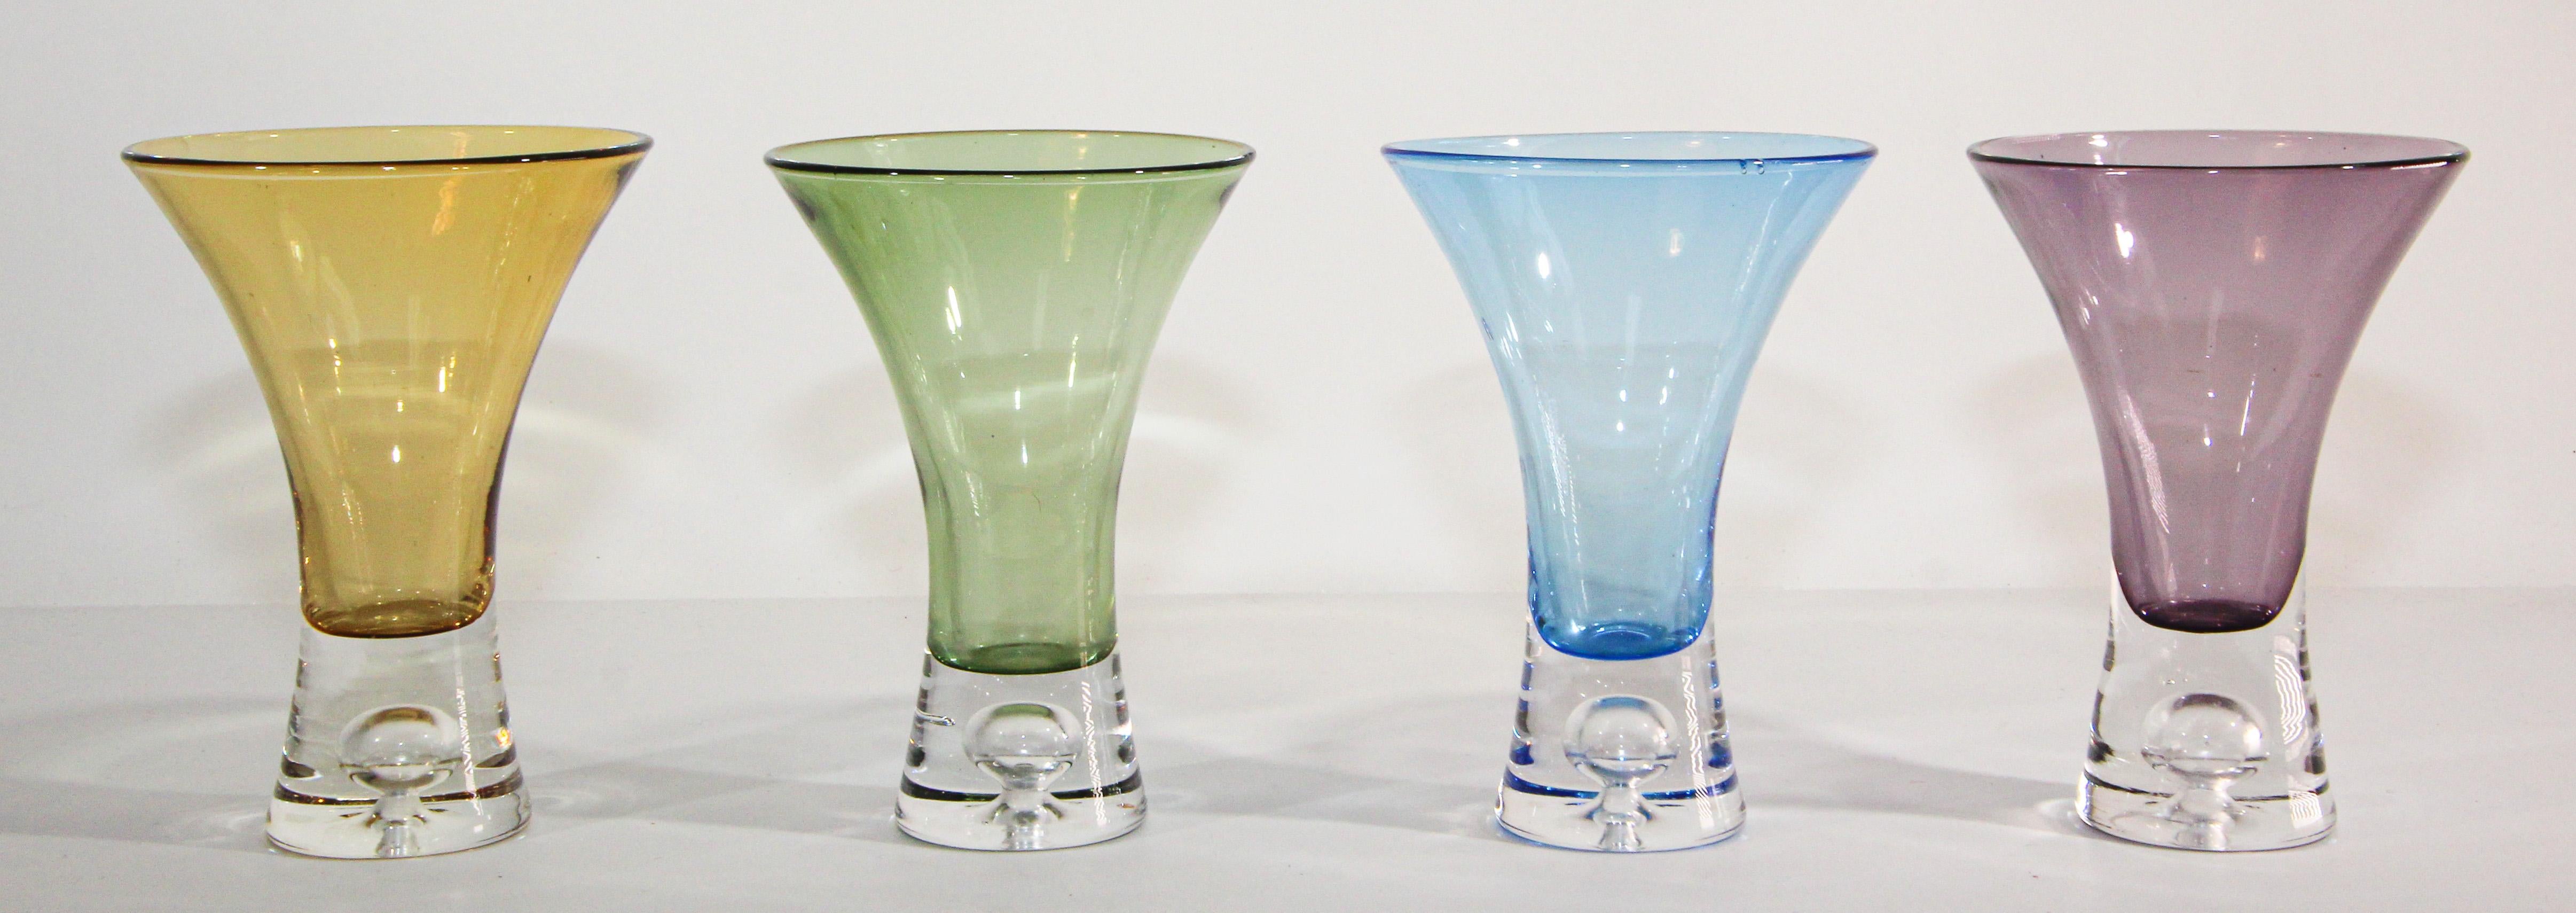 Beautiful Vintage Post Modern liquor Cordial shot drinking crystal glasses set of 4.
This set of four glasses boasts exquisite craftsmanship and distinctive color, each piece is different color, amber, pink, blue and jade green with a bubble in the